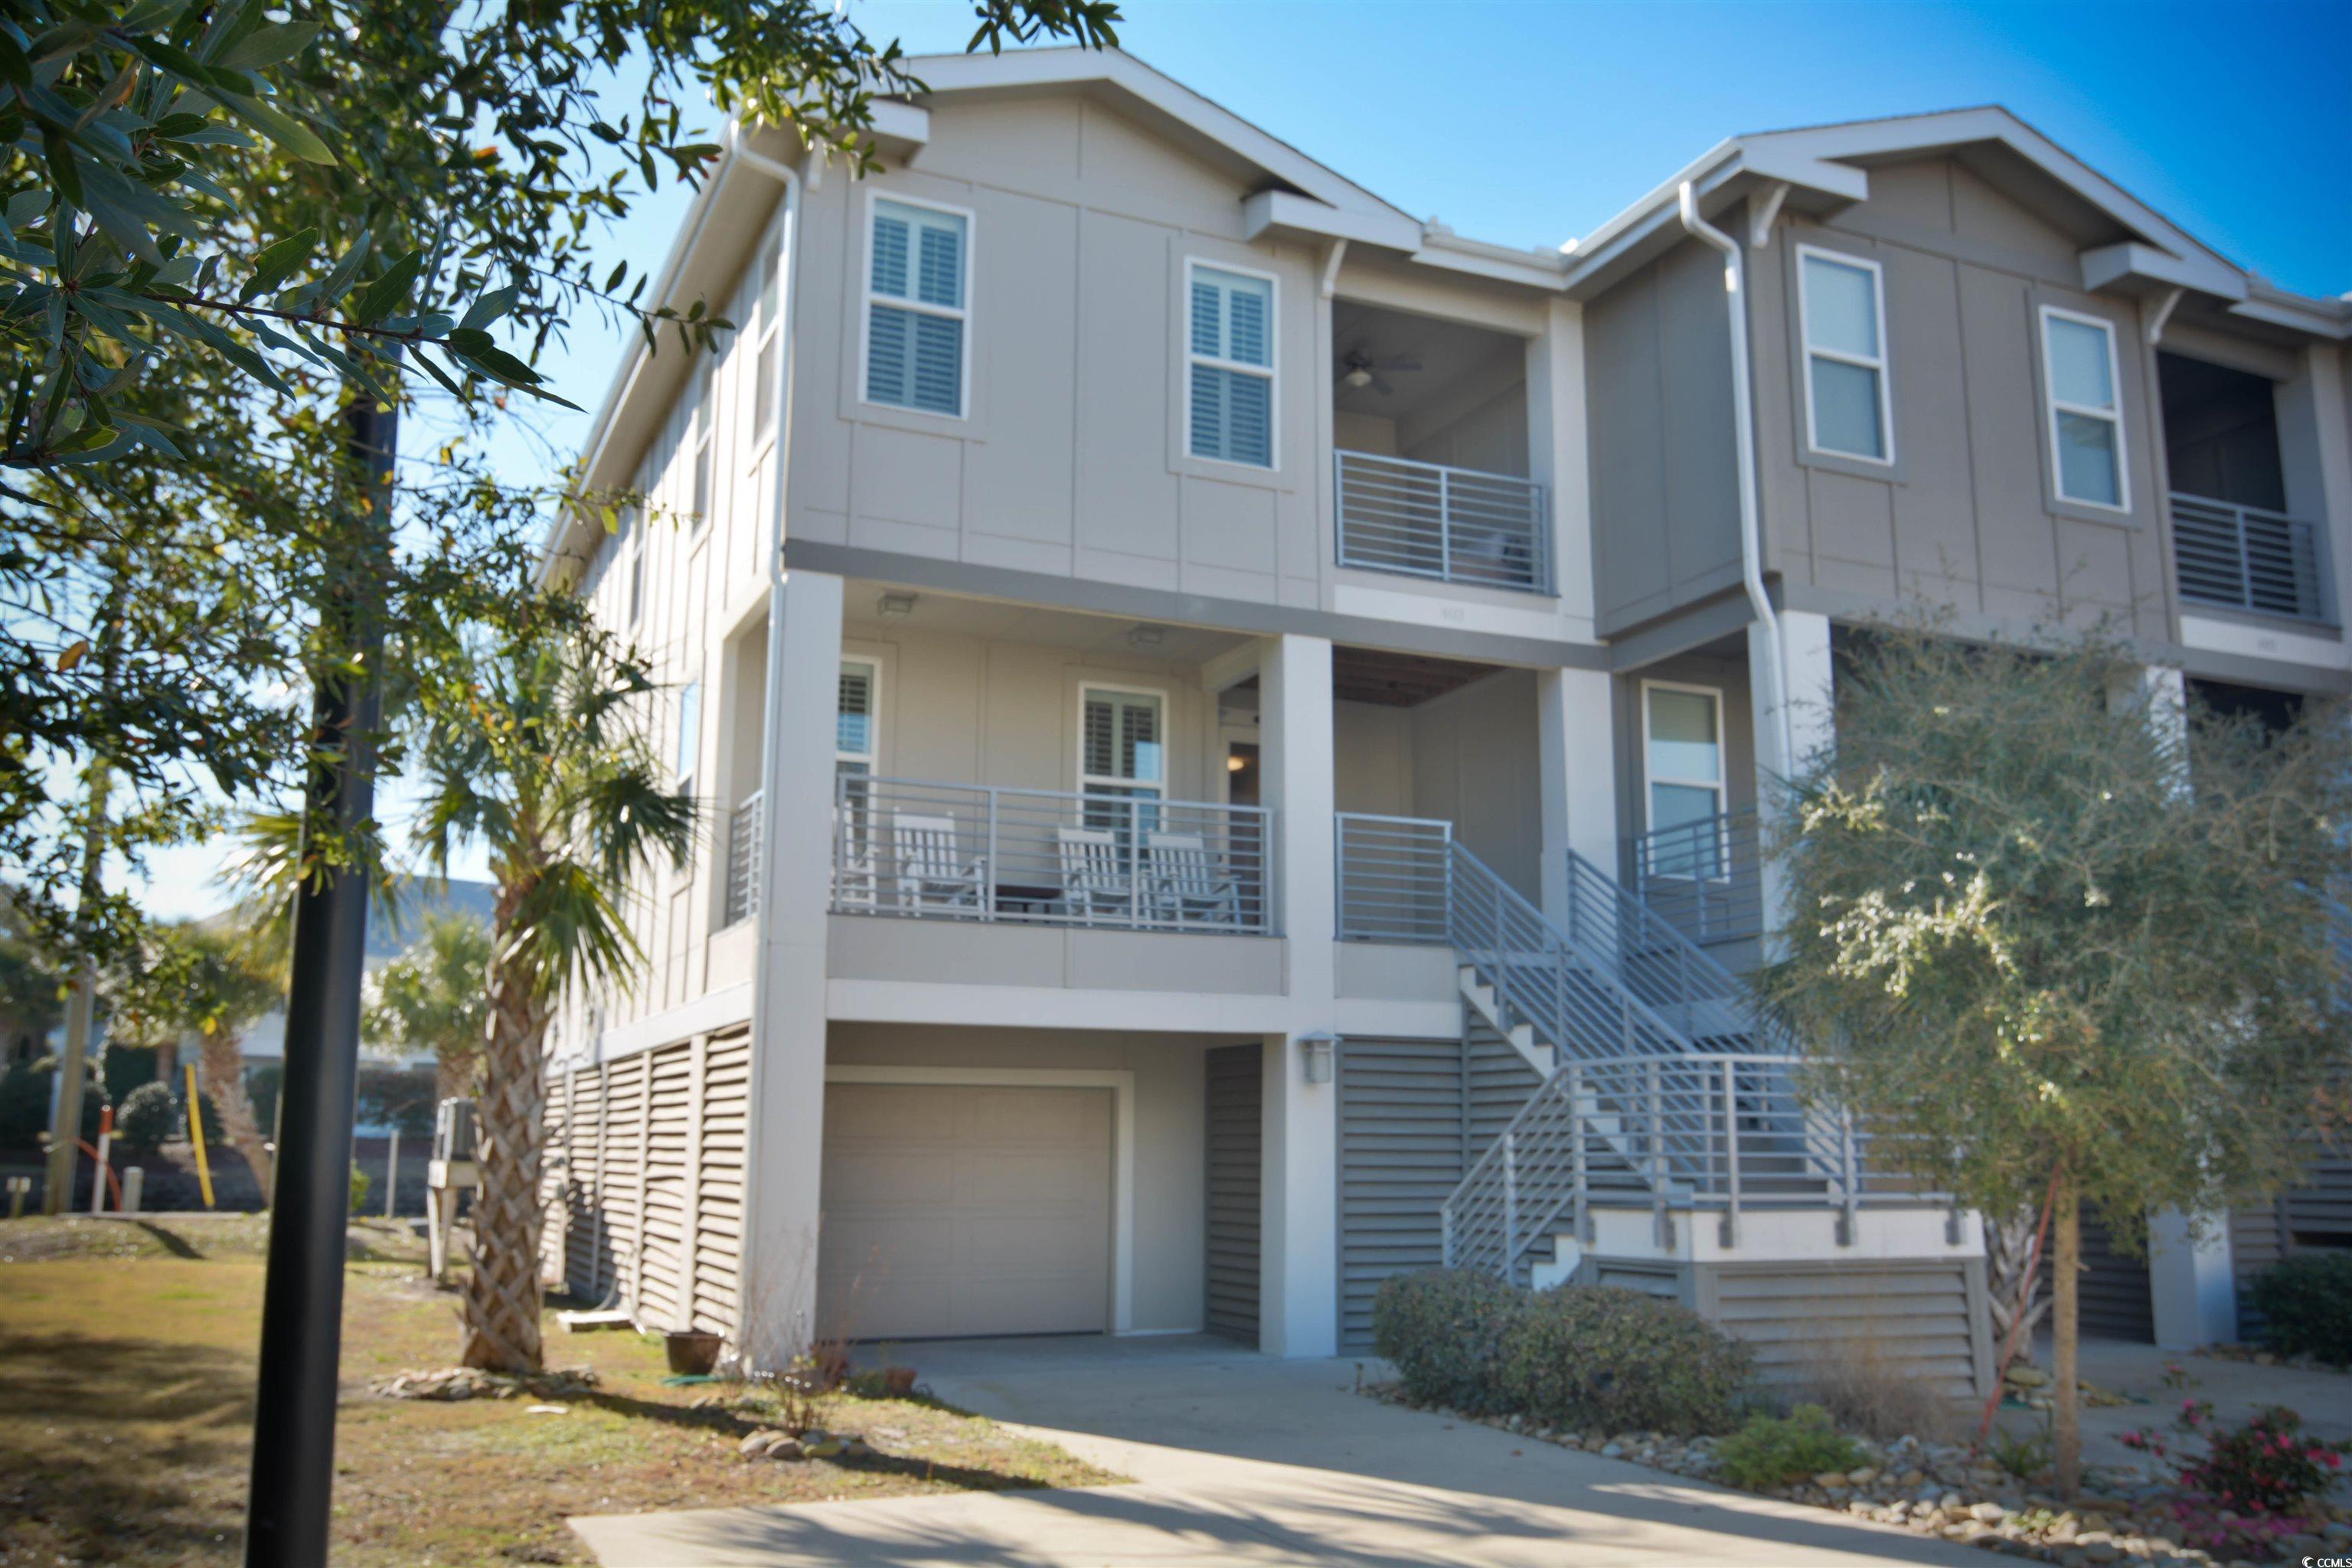 600 48th Ave. S, North Myrtle Beach, SC 29582